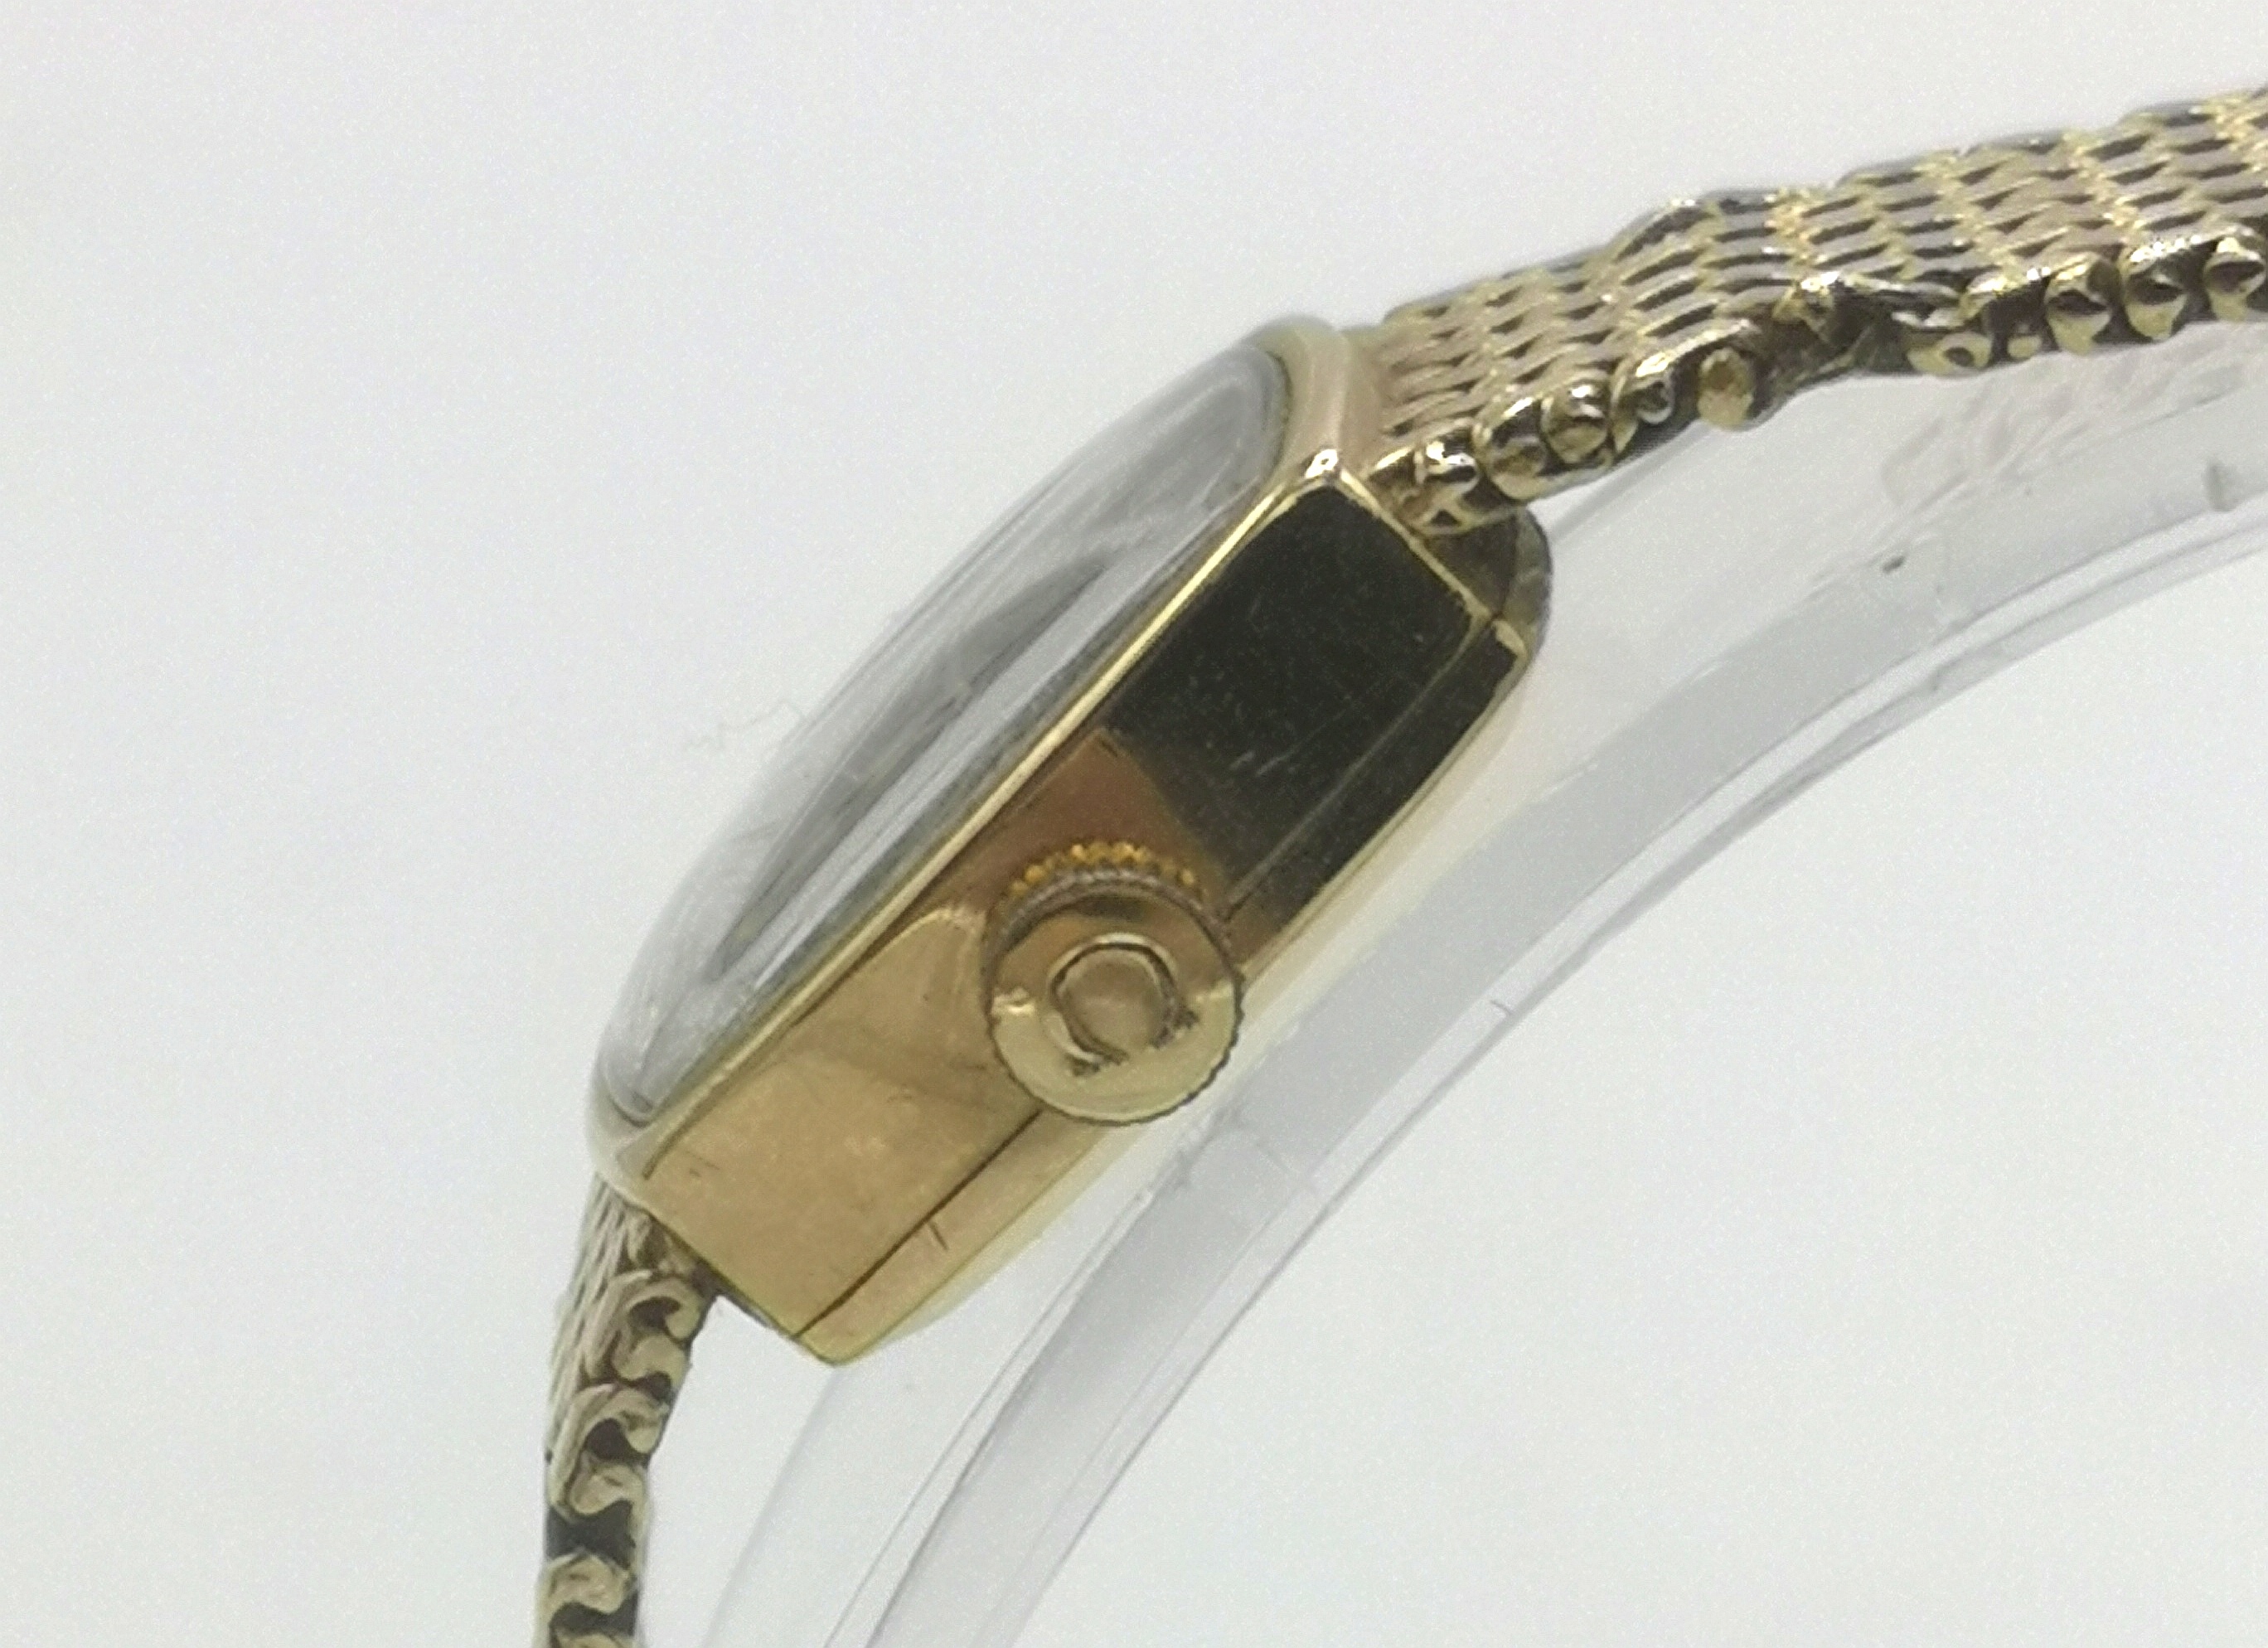 Ladies Omega wristwatch in 9ct gold case - Image 3 of 8